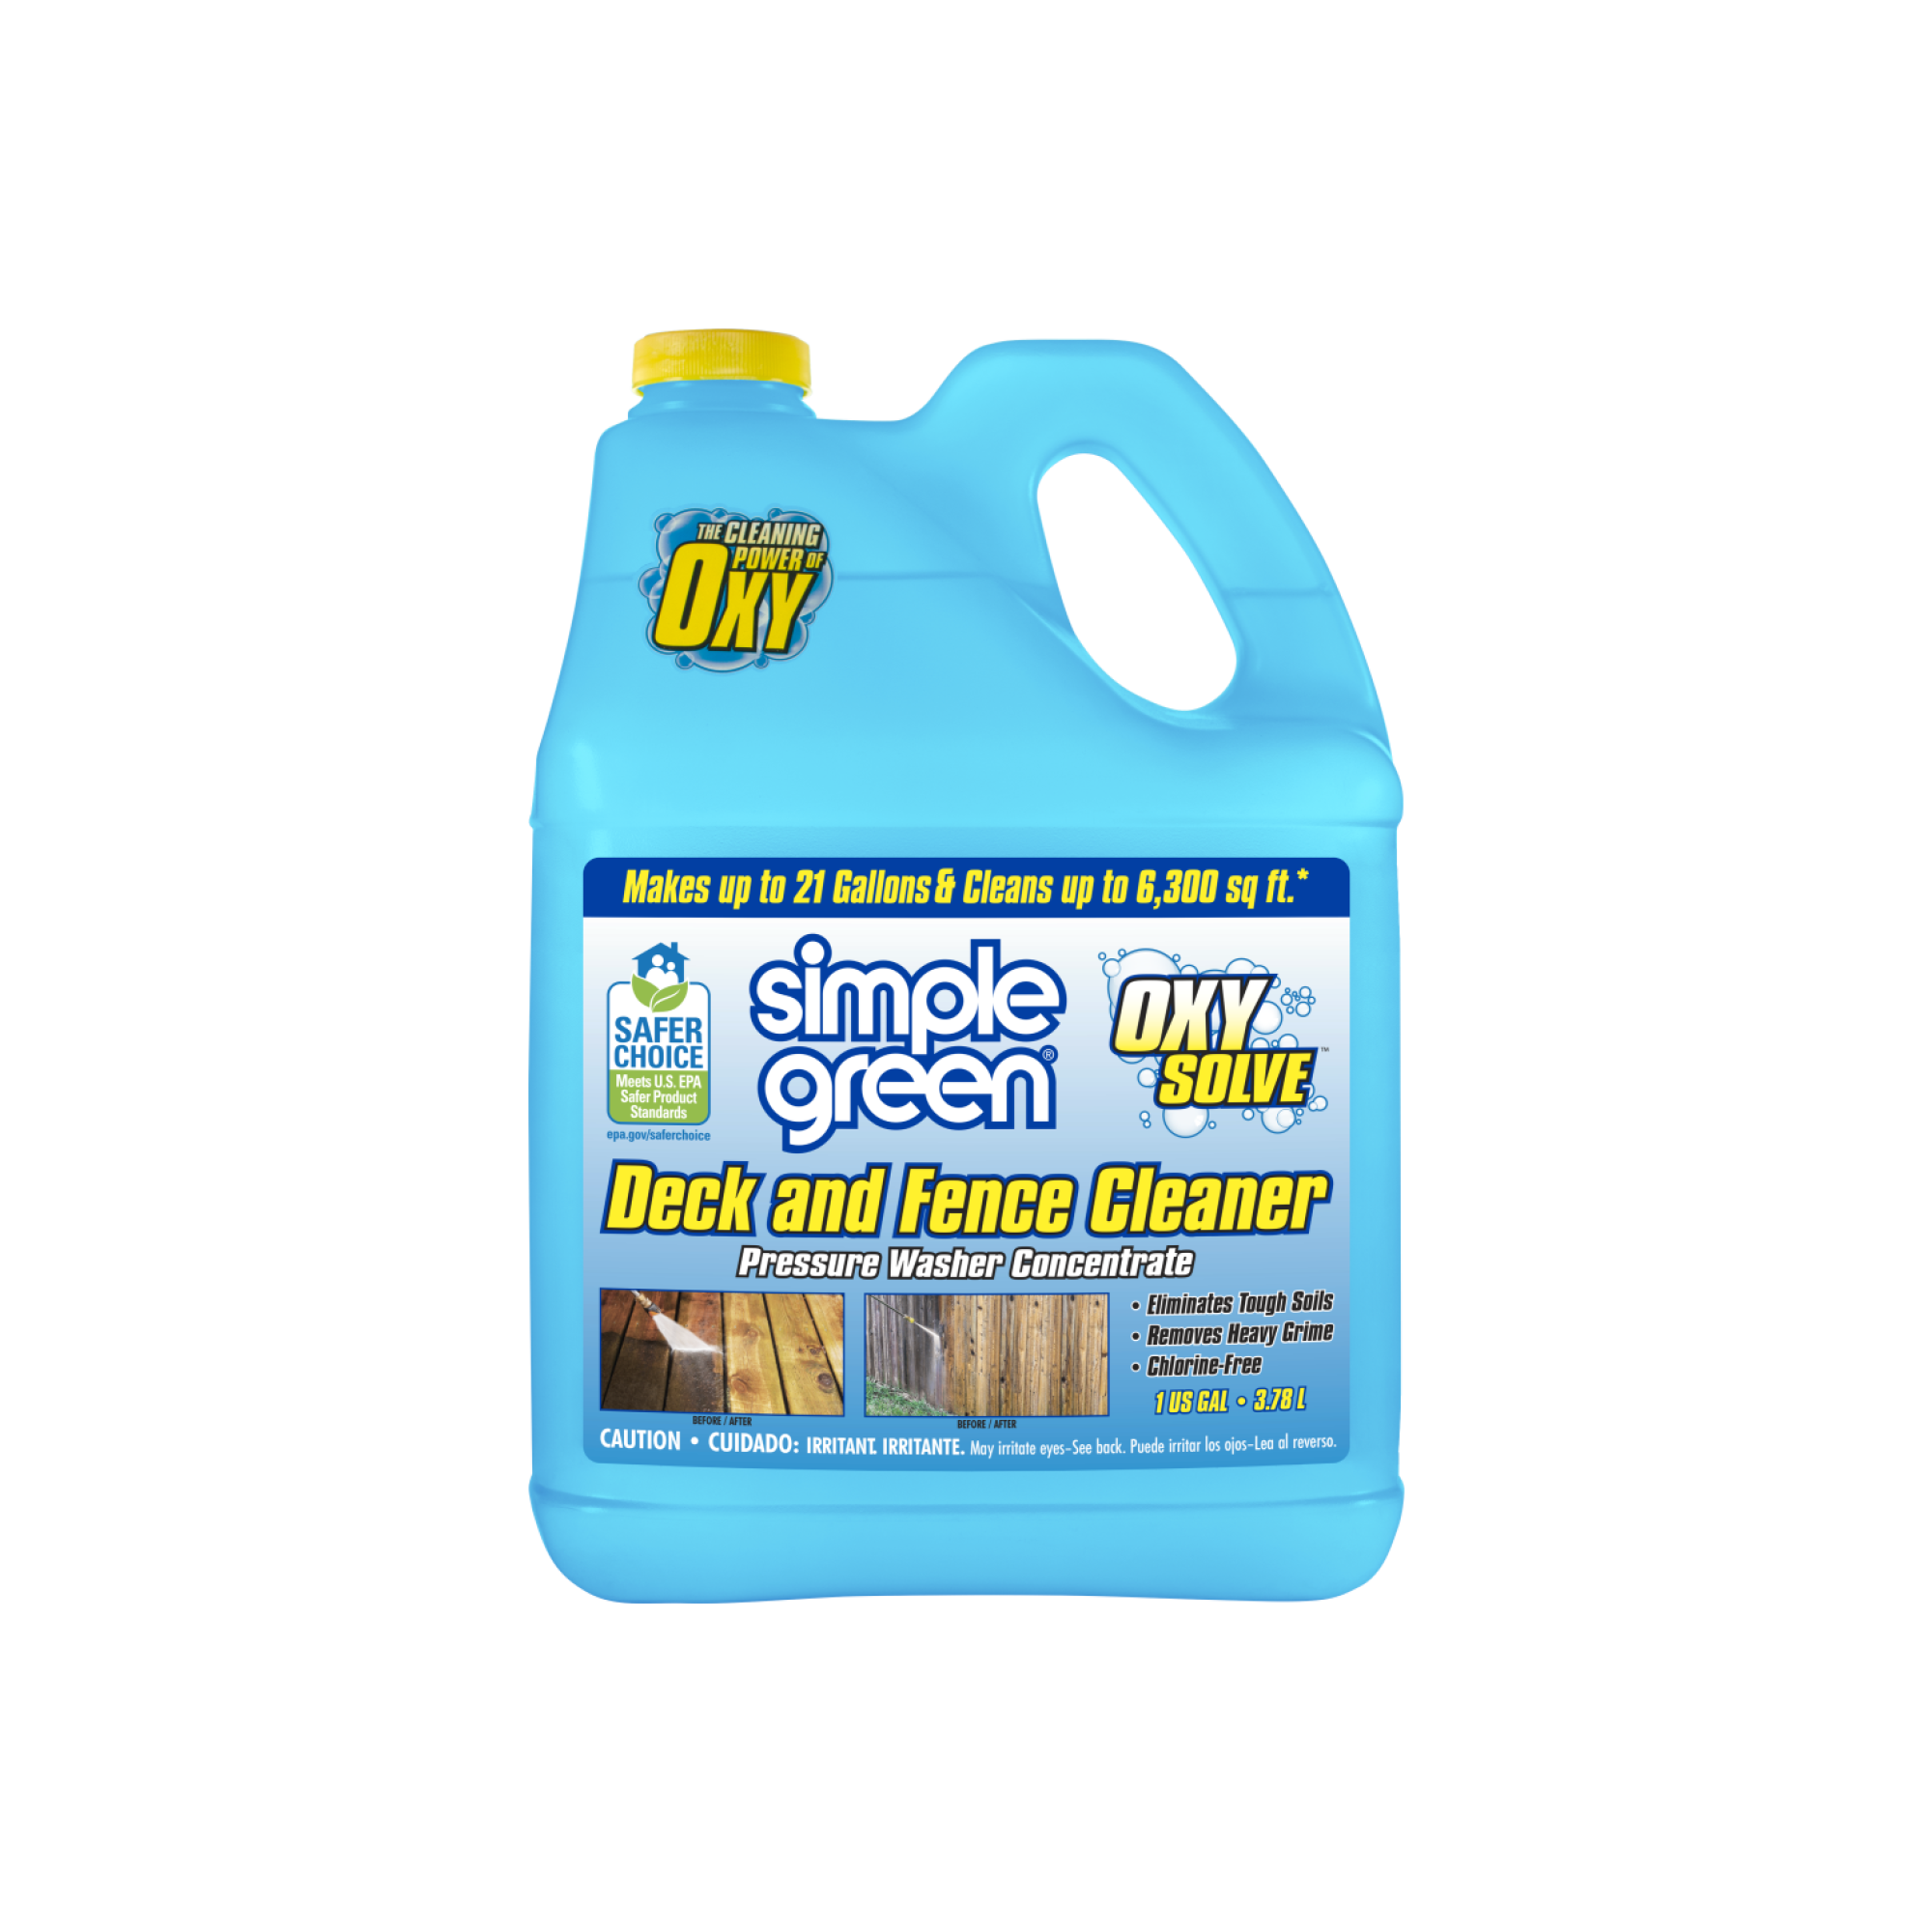 Valspar Fast-Acting 128-fl oz Deck Cleaner in the Deck Cleaners department  at